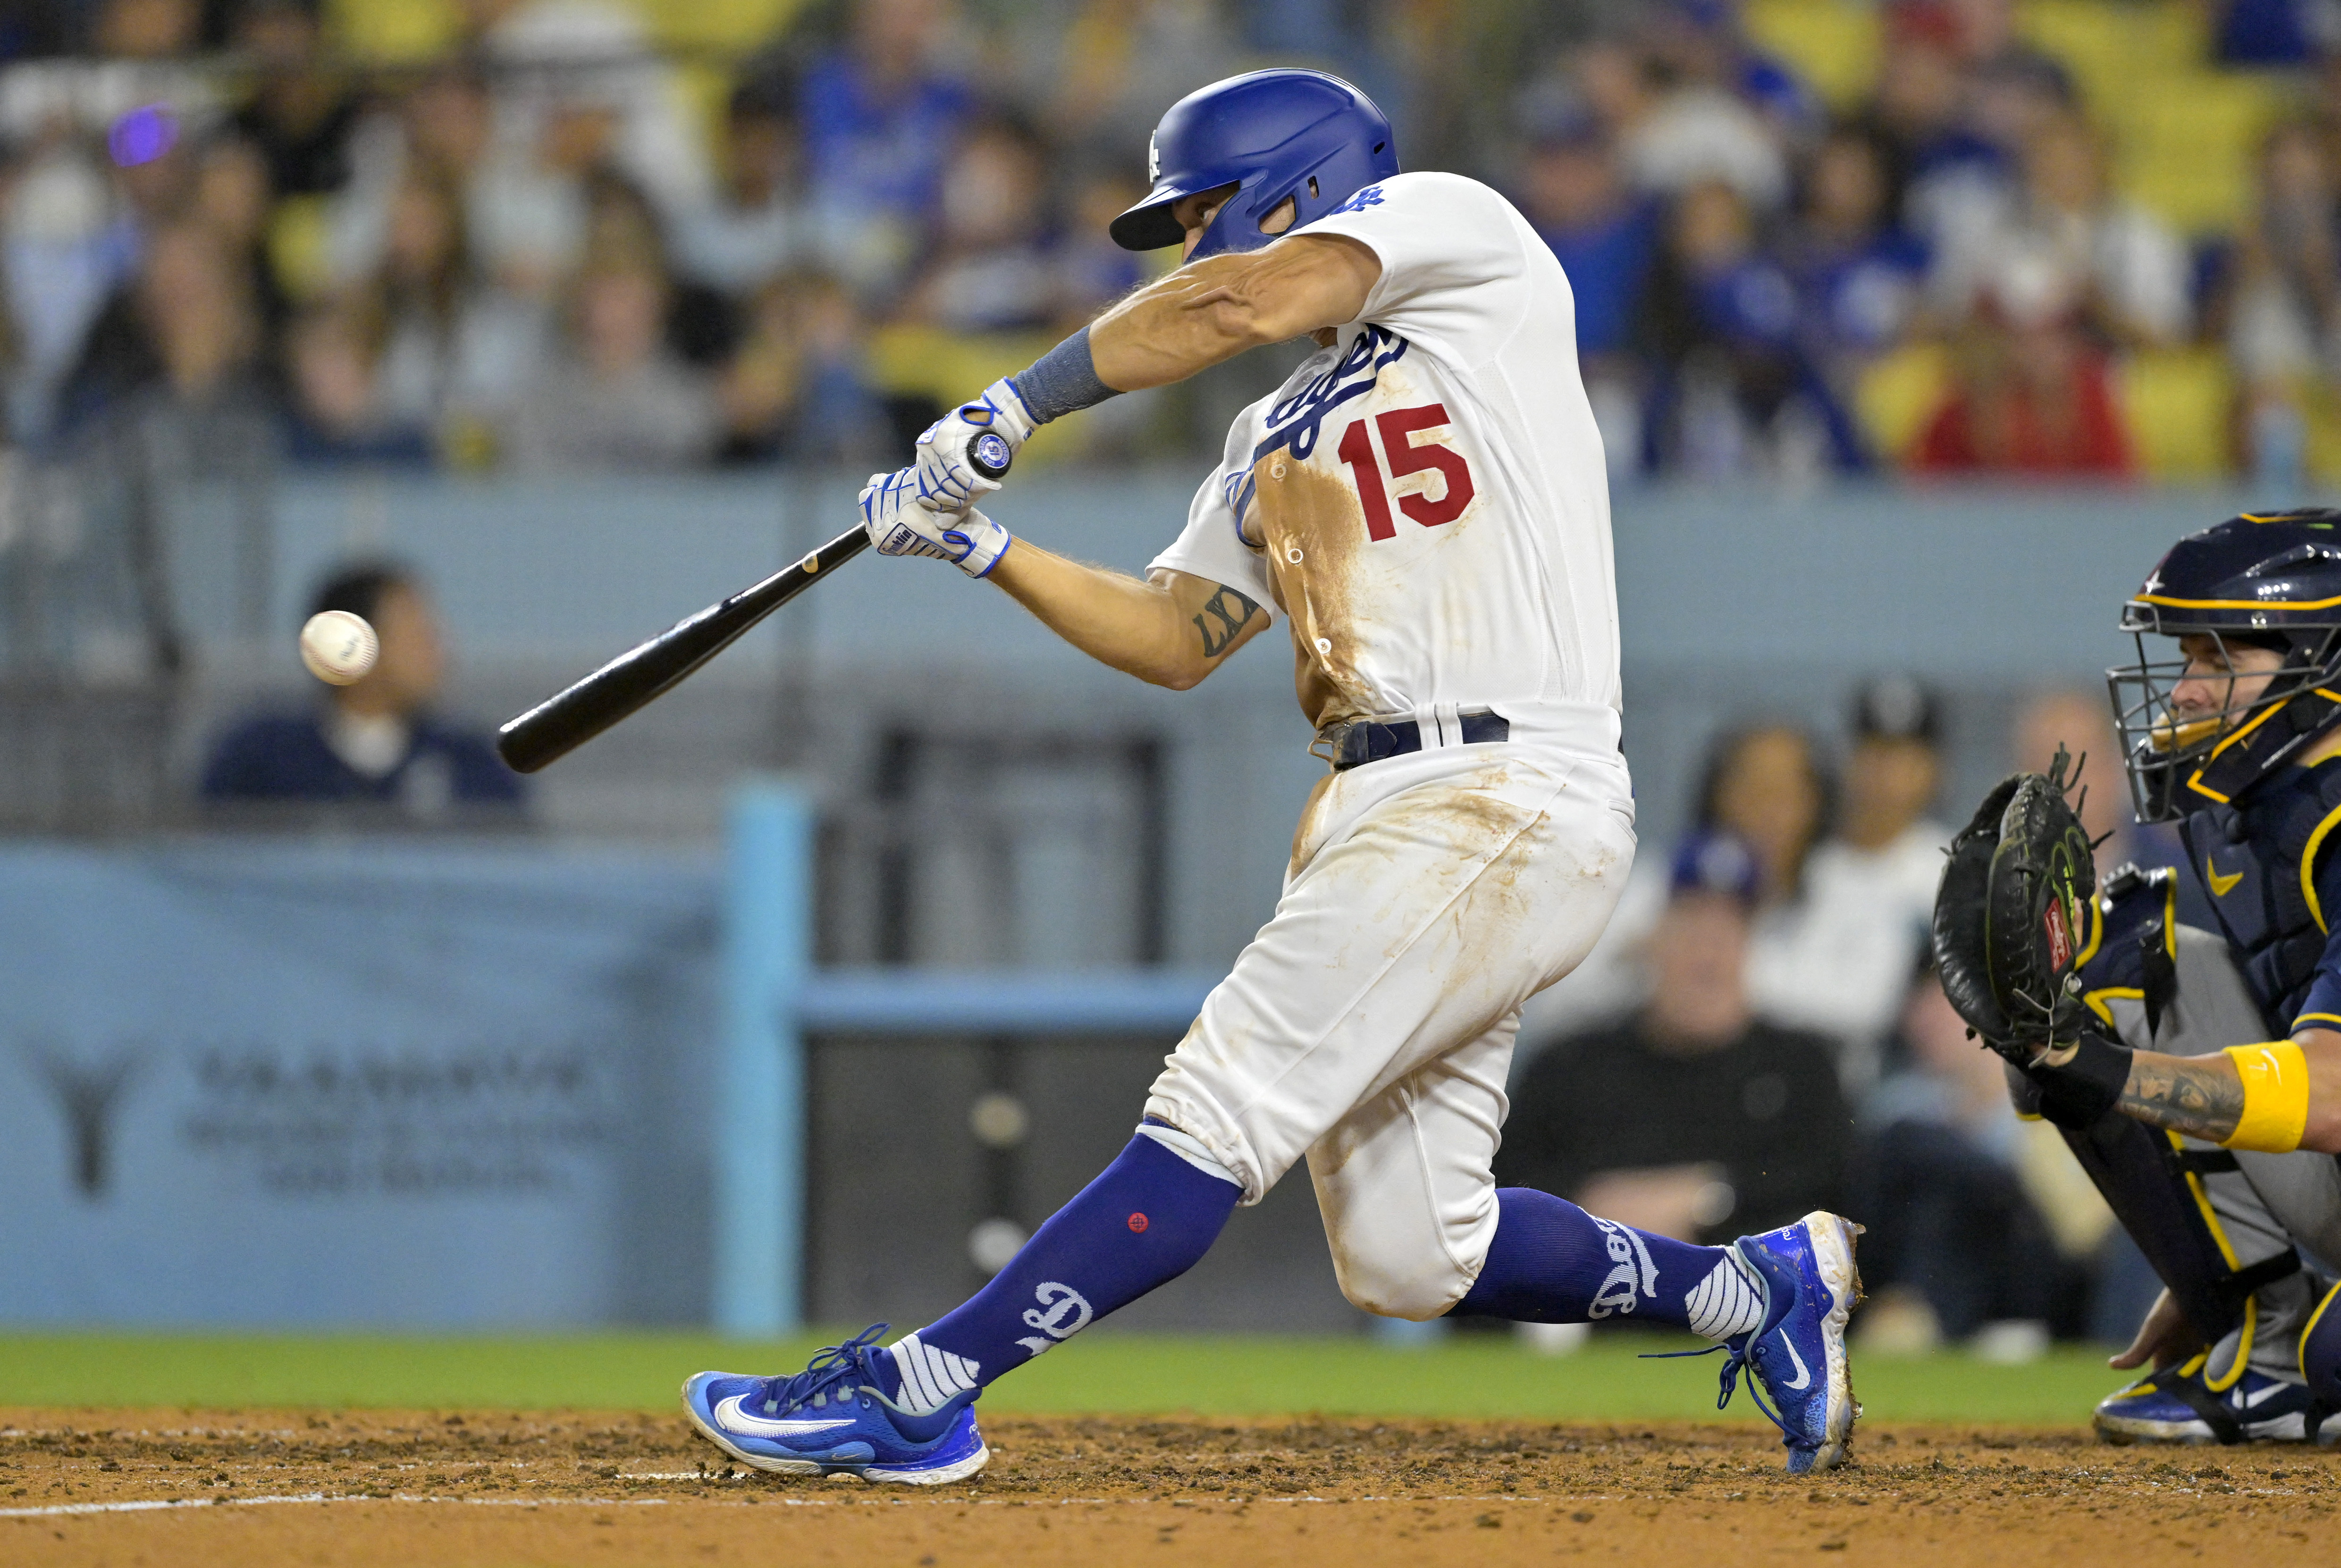 Austin Barnes sparks rally as Dodgers win Game 1 of doubleheader